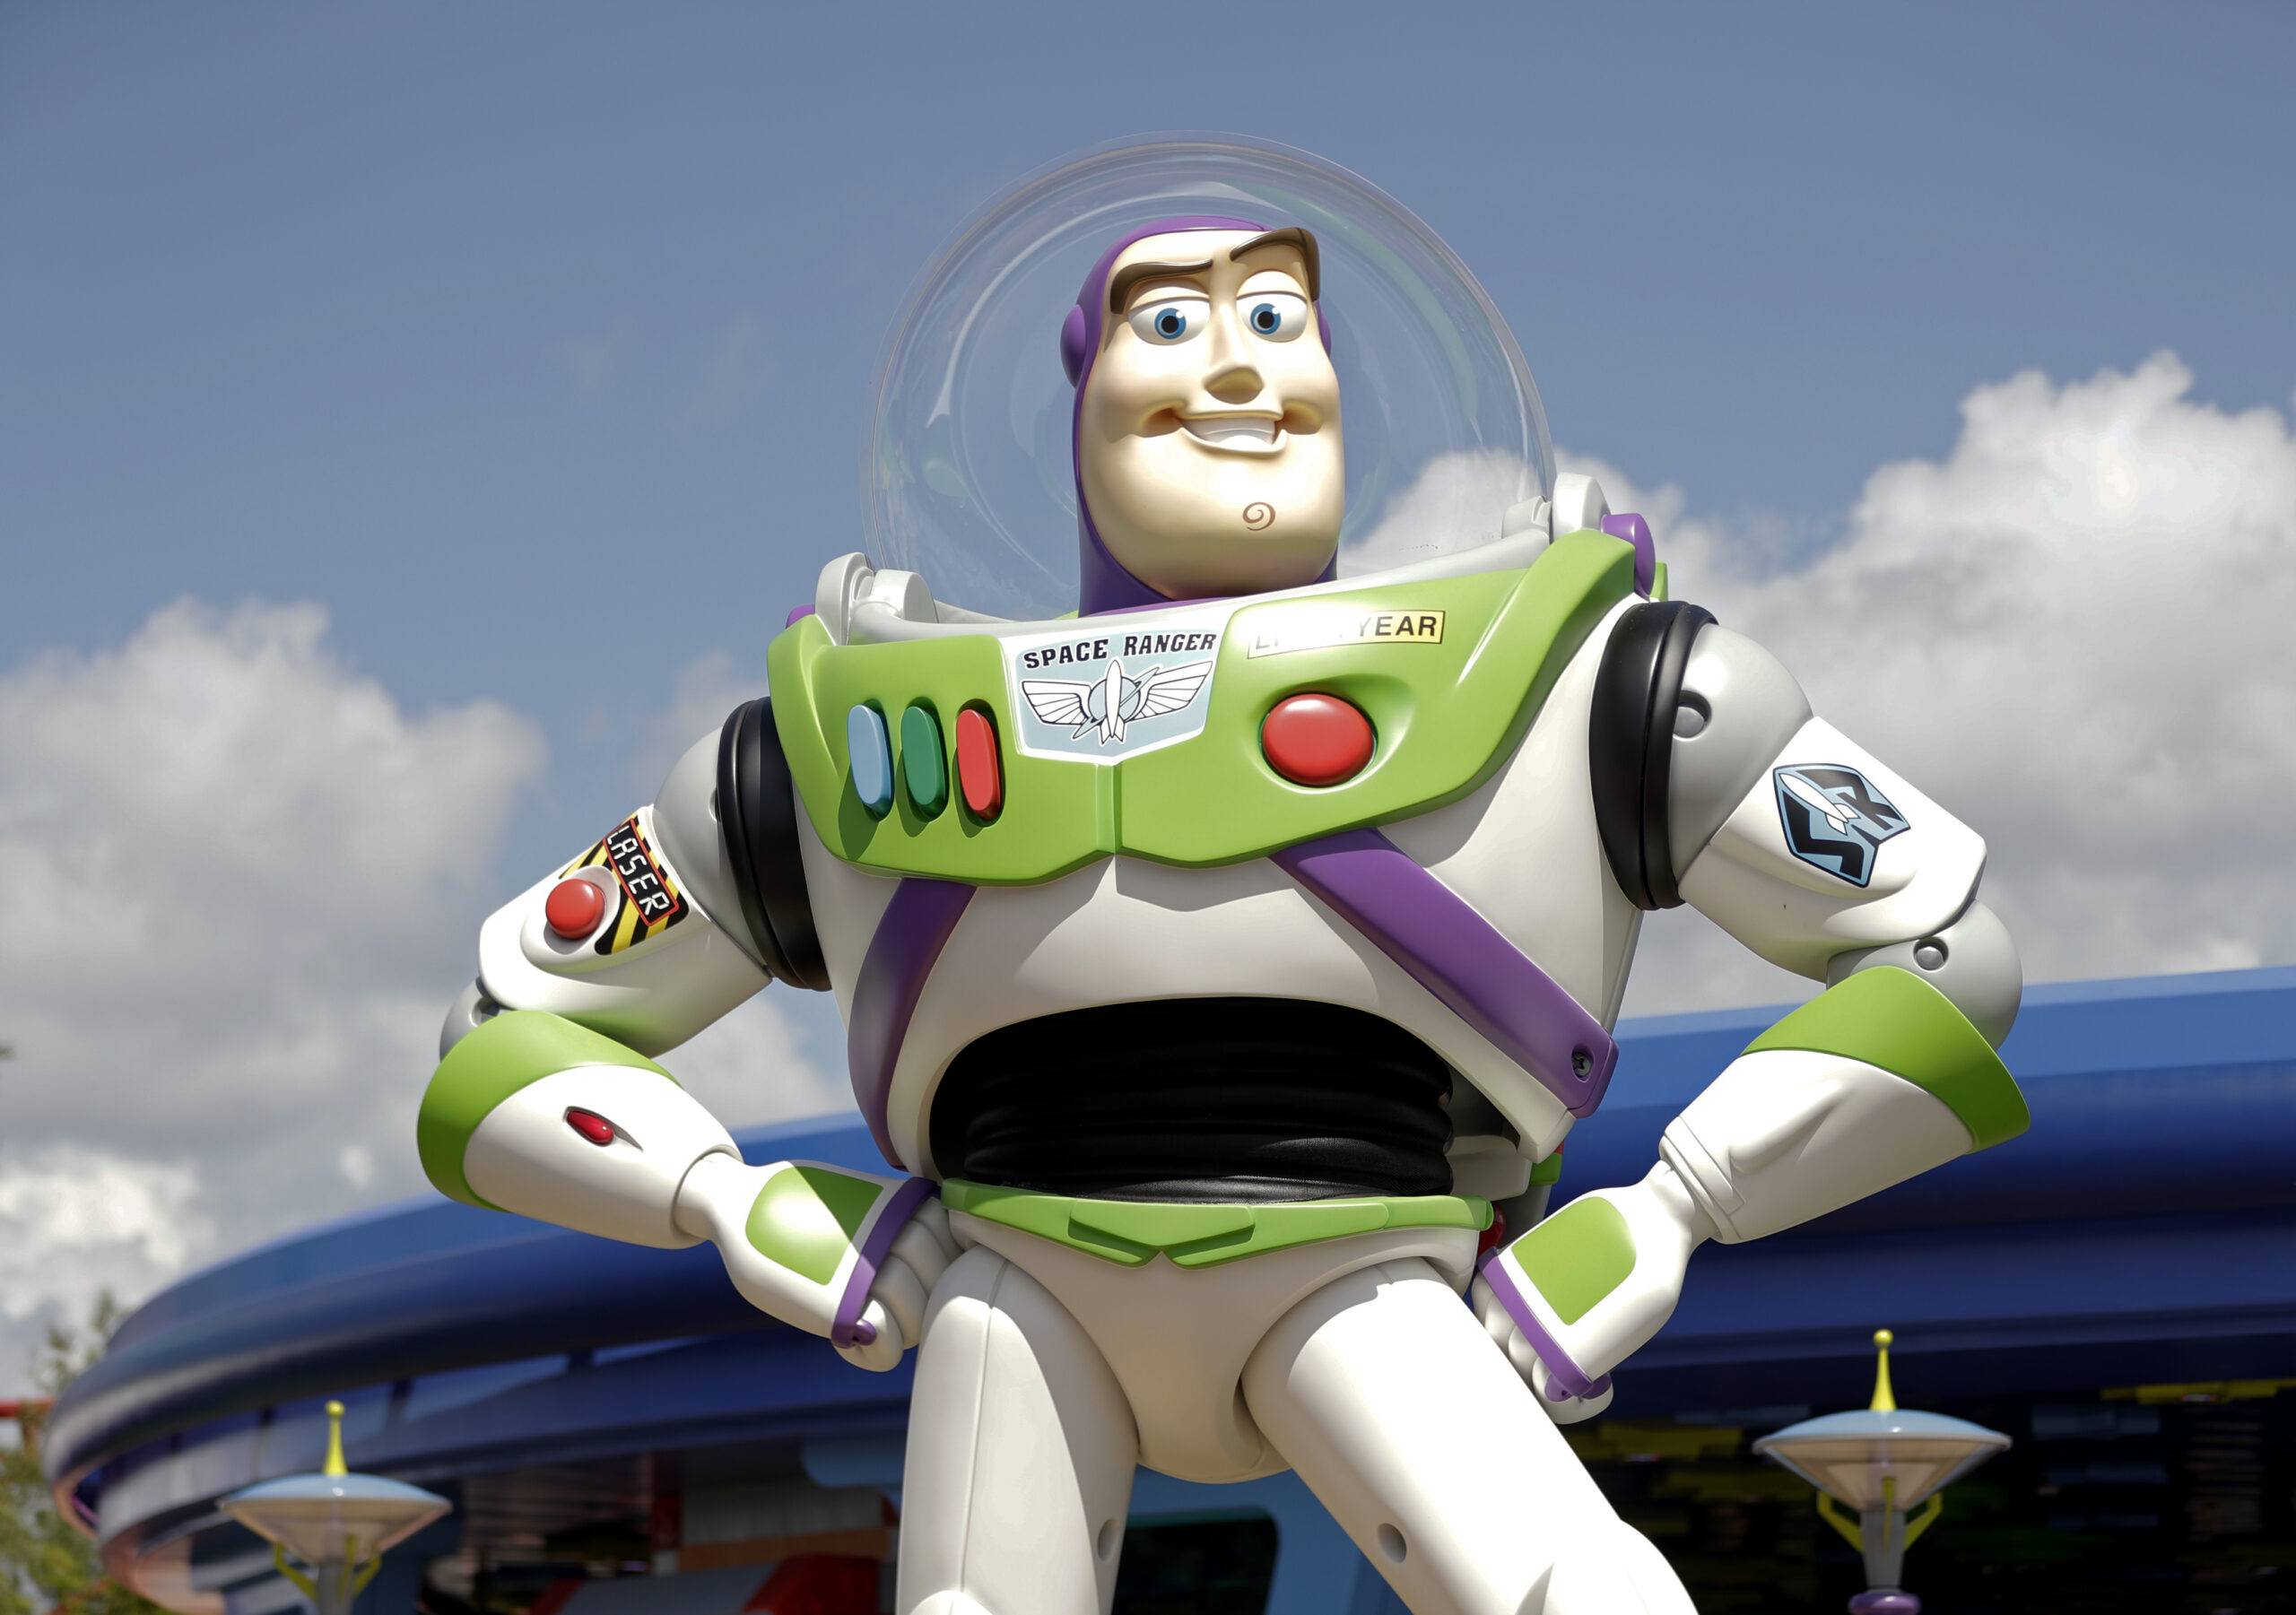 FILE - Character Buzz Lightyear stands near the entrance to the Aliens Swirling Saucers ride at Toy Story Land in Disney's Hollywood Studios at Walt Disney World in Lake Buena Vista, Fla., June 23, 2018. Malaysia's film censors said Friday, June 17, 2022, that it was Disney's decision to ax the animated film “Lightyear” from the country's cinemas after refusing to cut scenes promoting homosexuality. (AP Photo/John Raoux, File)